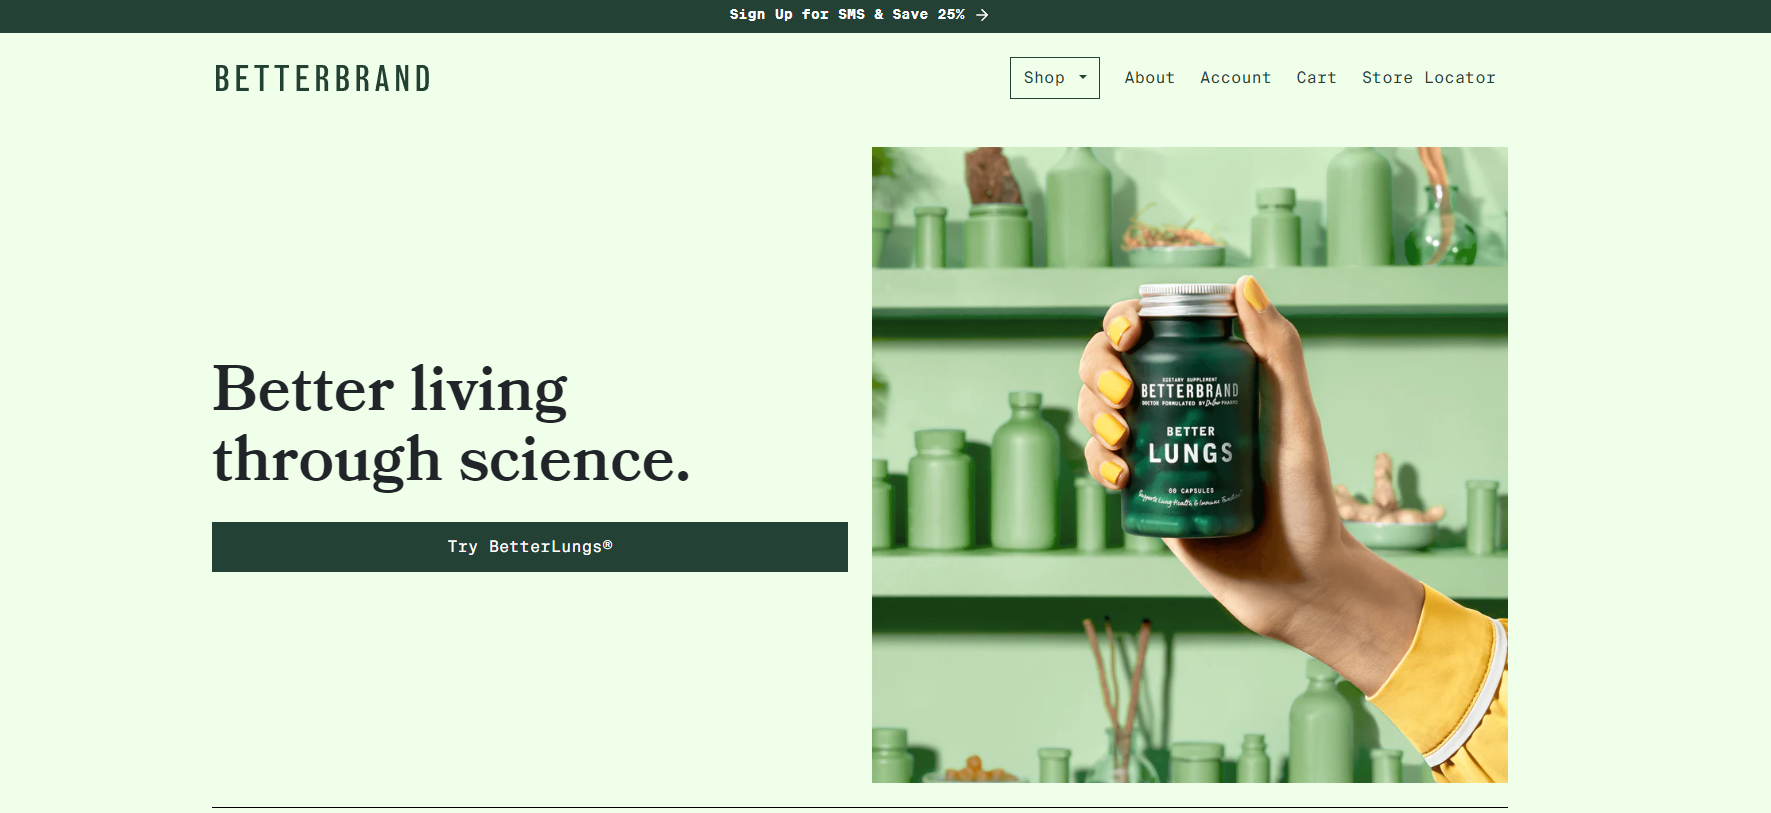 BetterBrand is a dynamic startup that has recently secured an impressive $6M in Series A funding from prominent investors.